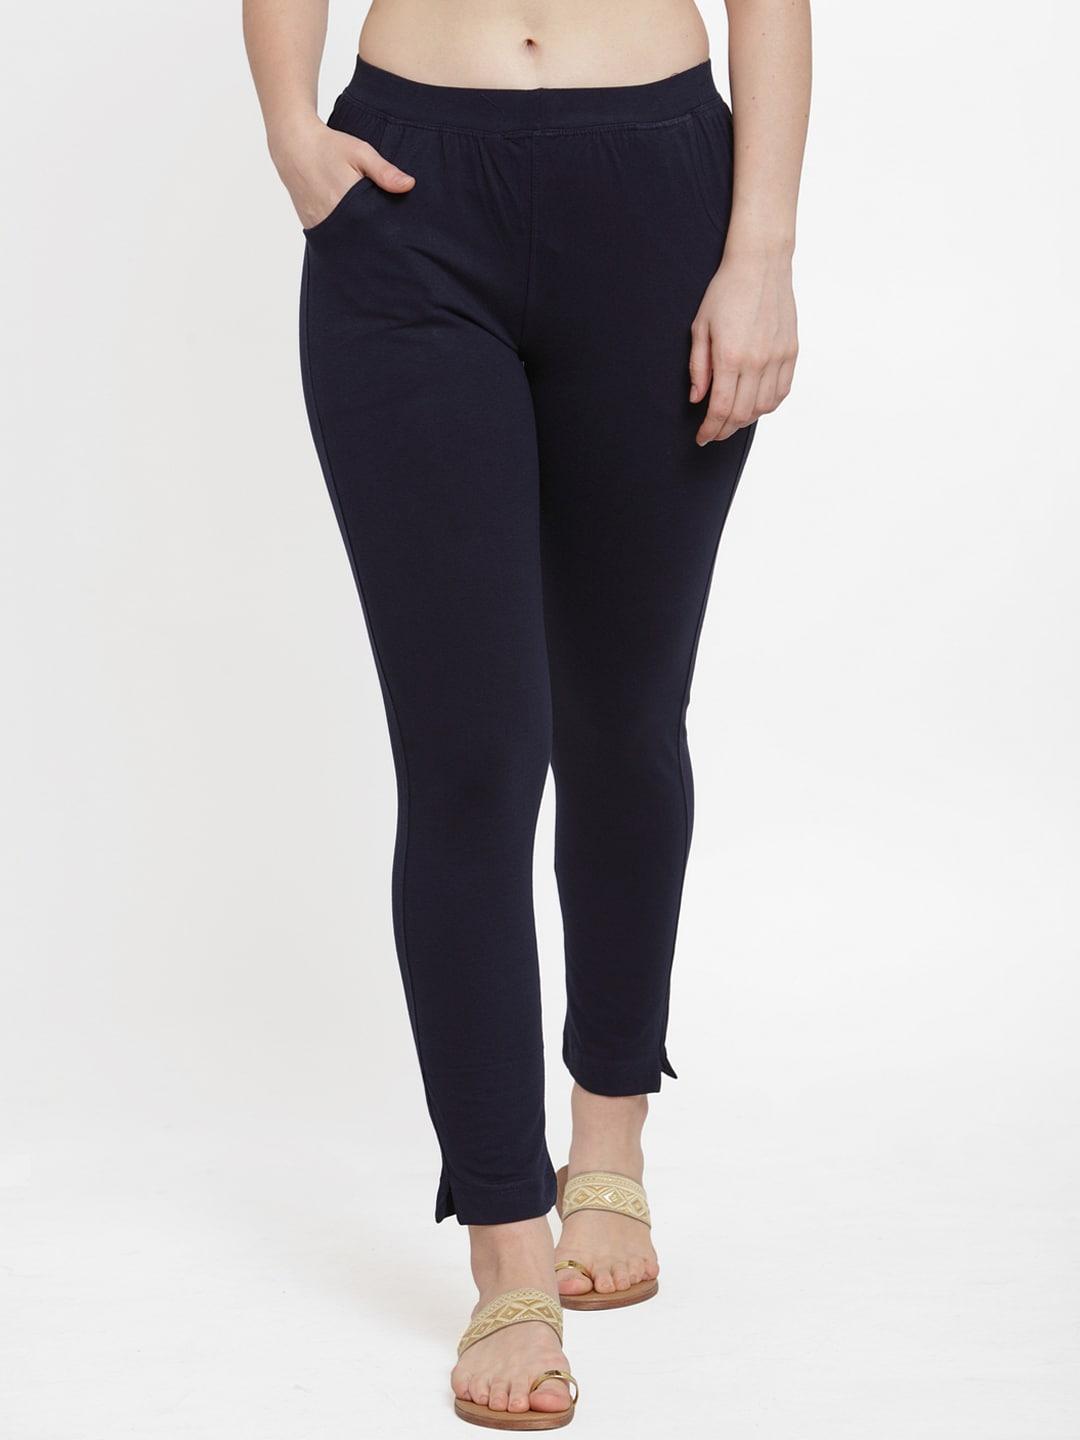 tag 7 women navy blue solid ankle-length leggings